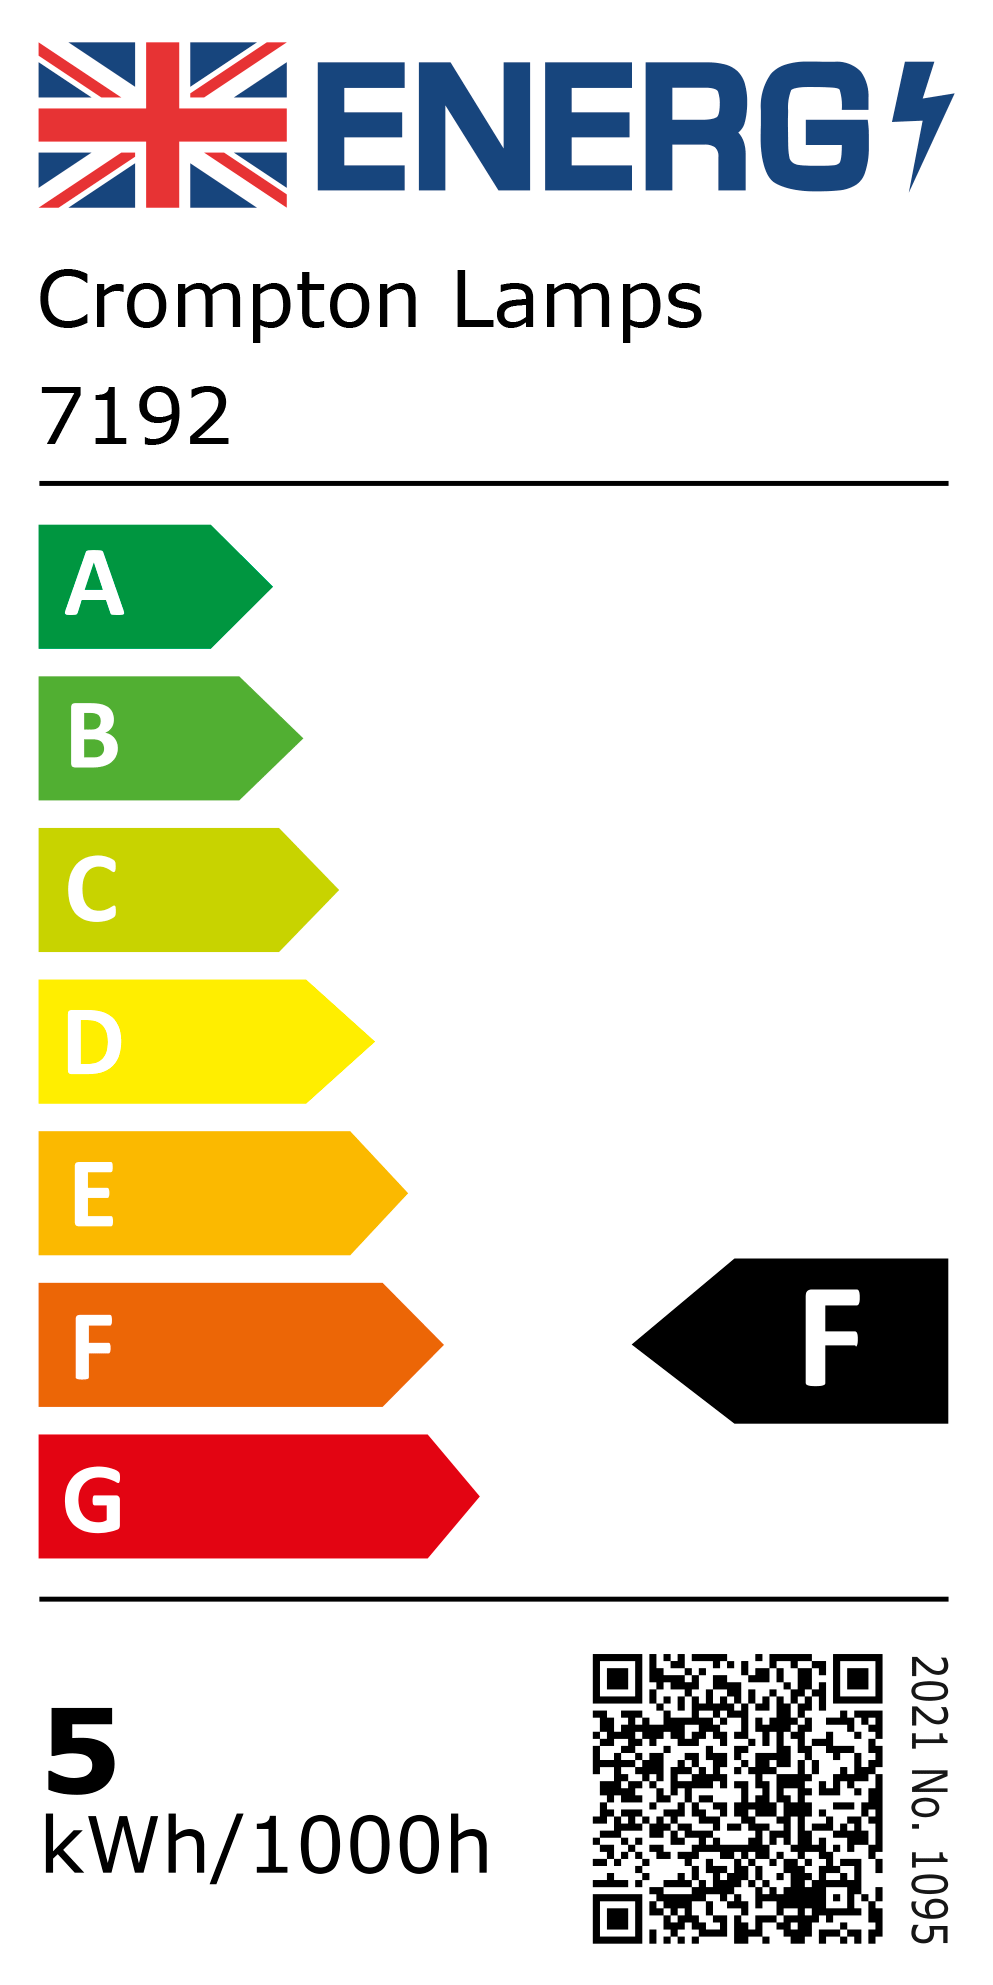 New 2021 Energy Rating Label: Stock Code 7192